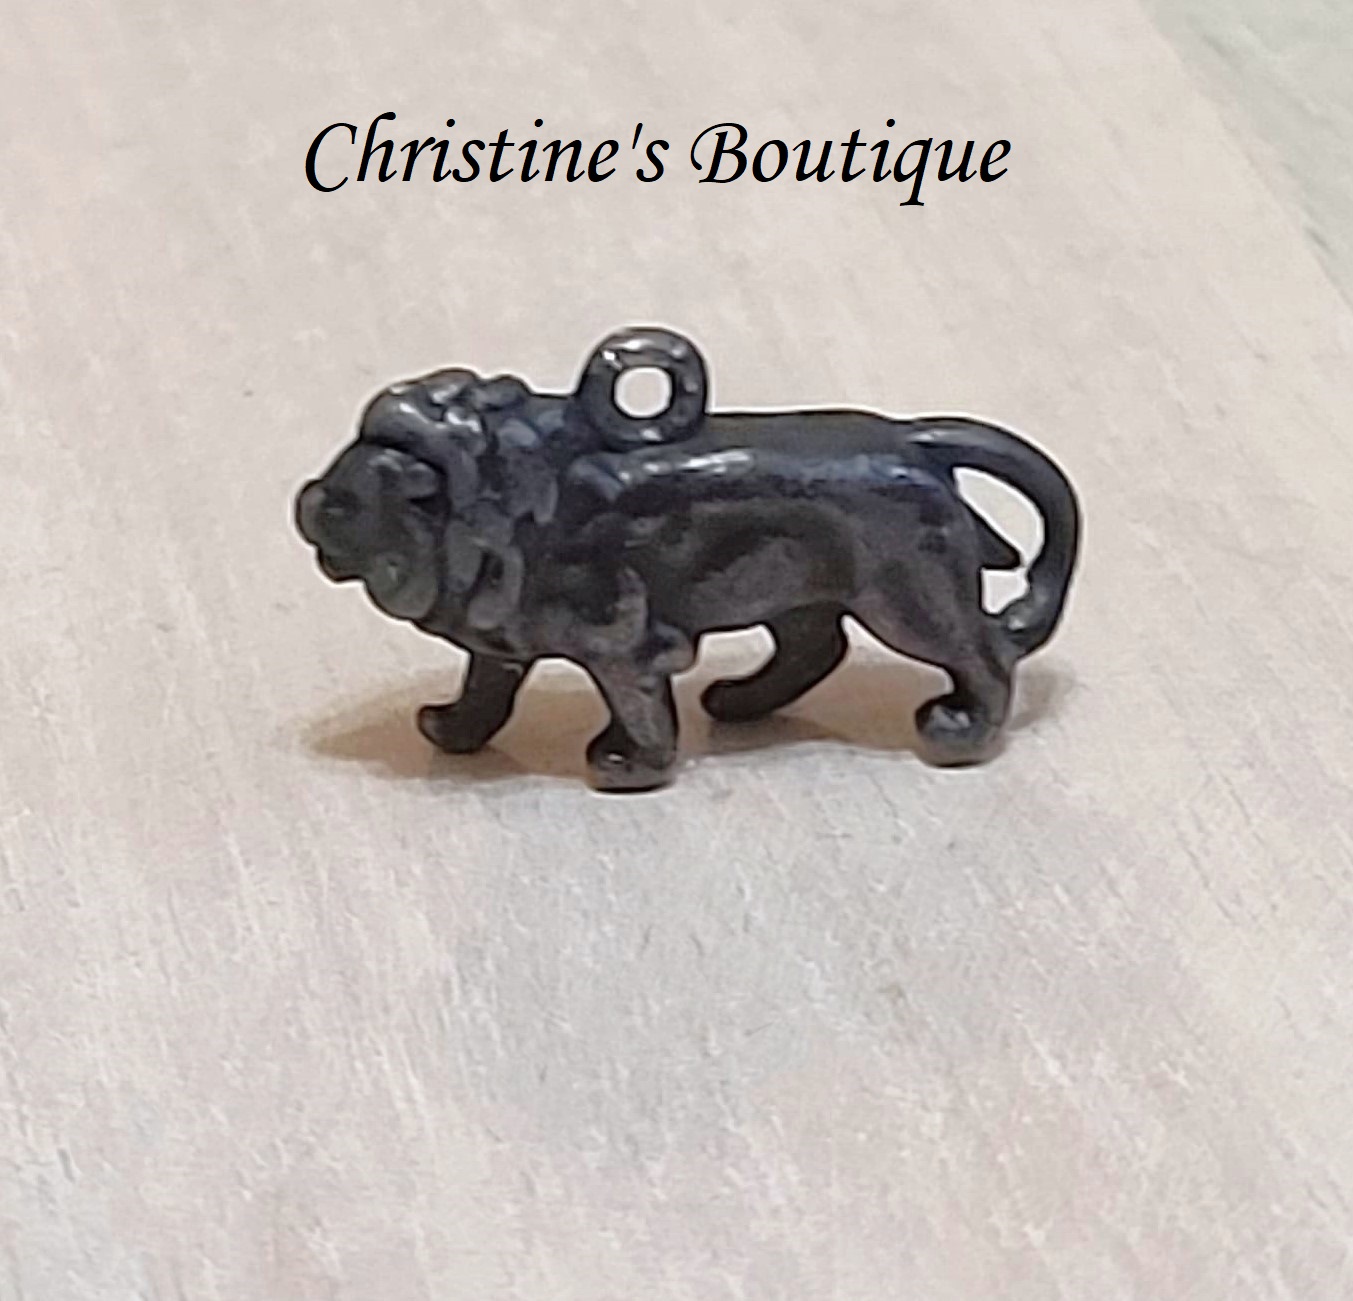 Pewter lion charm, vintage charm with 3D form